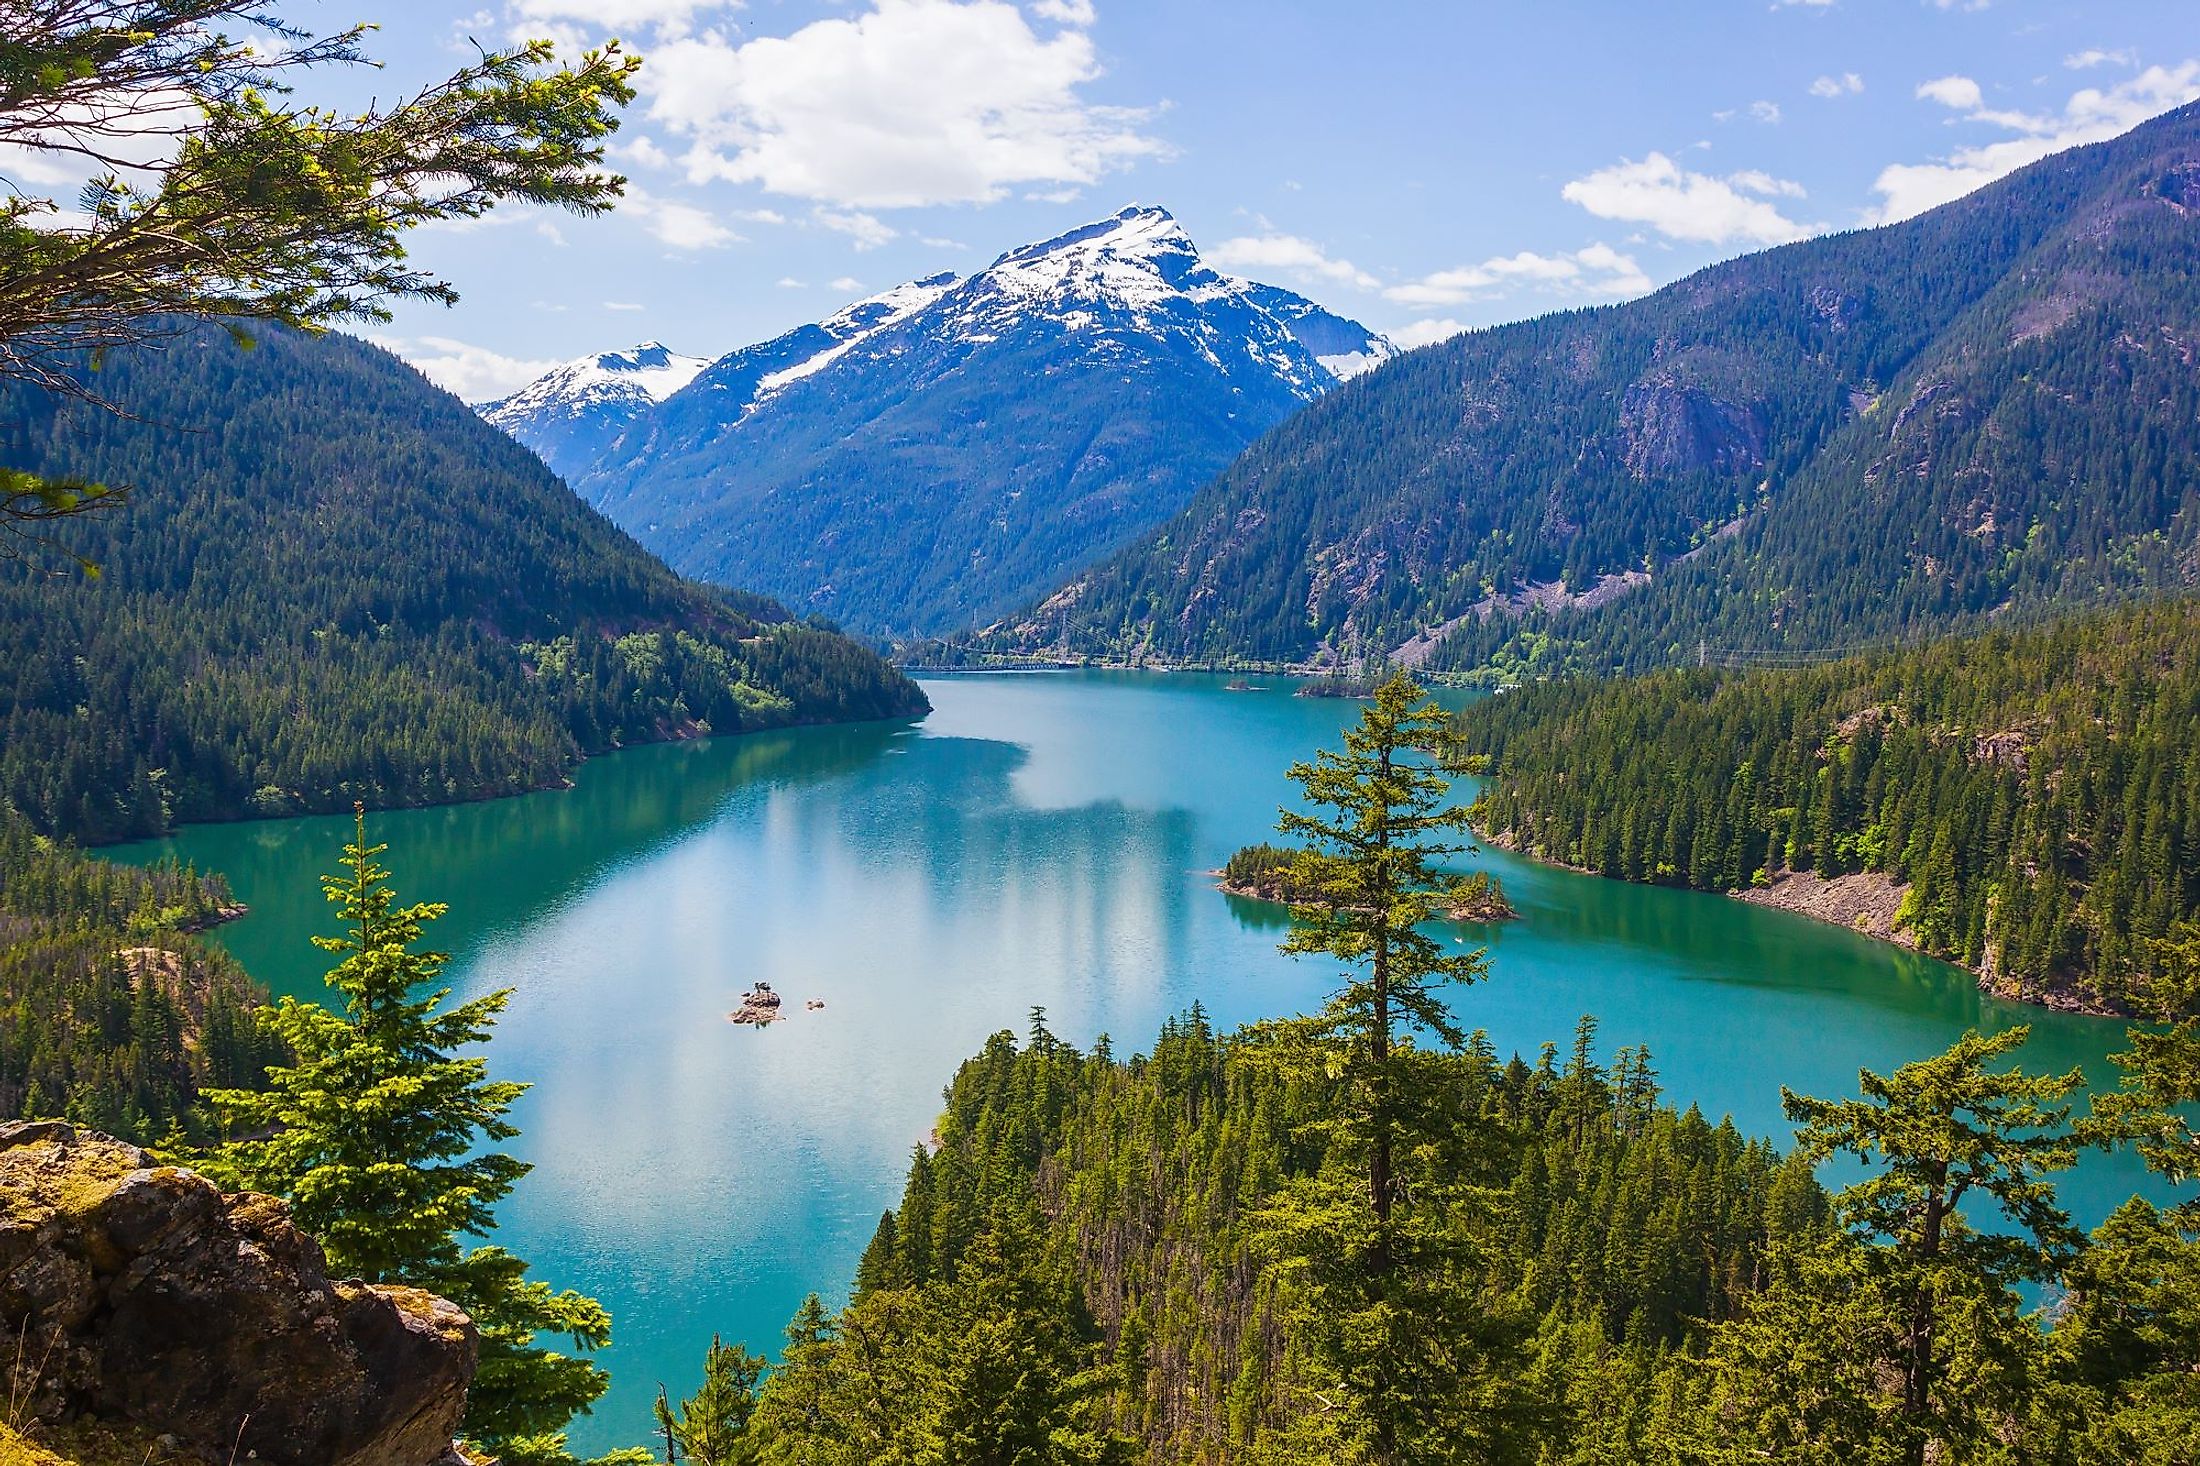 The turquoise Diablo Lake as seen from the Diablo Lake Overlook in North Cascades National Park.